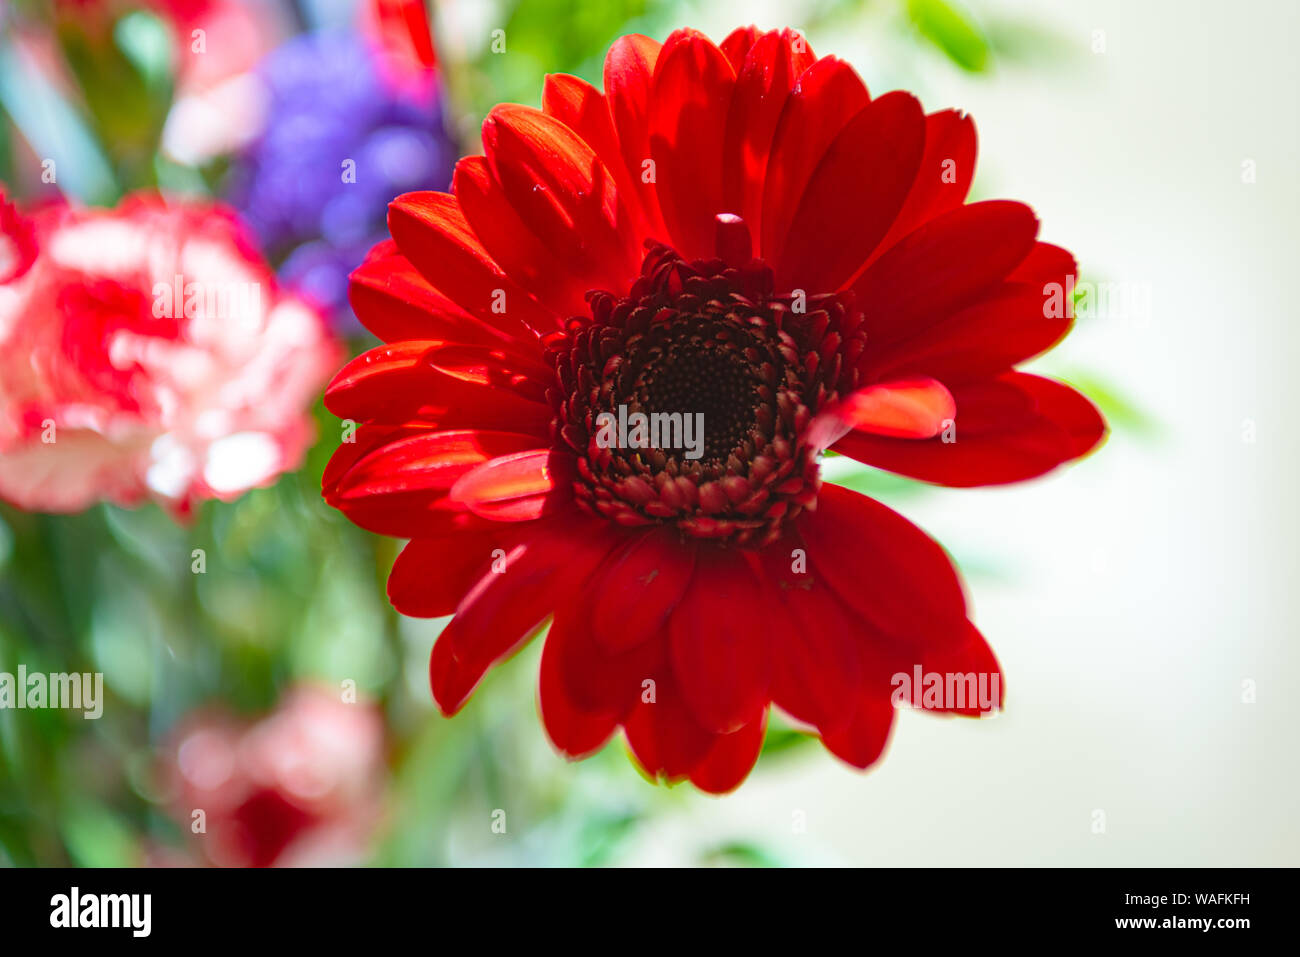 Red Barberton Daisy (Gerbera Jamessonii) flower with red, white and purple flowers in background. Stock Photo